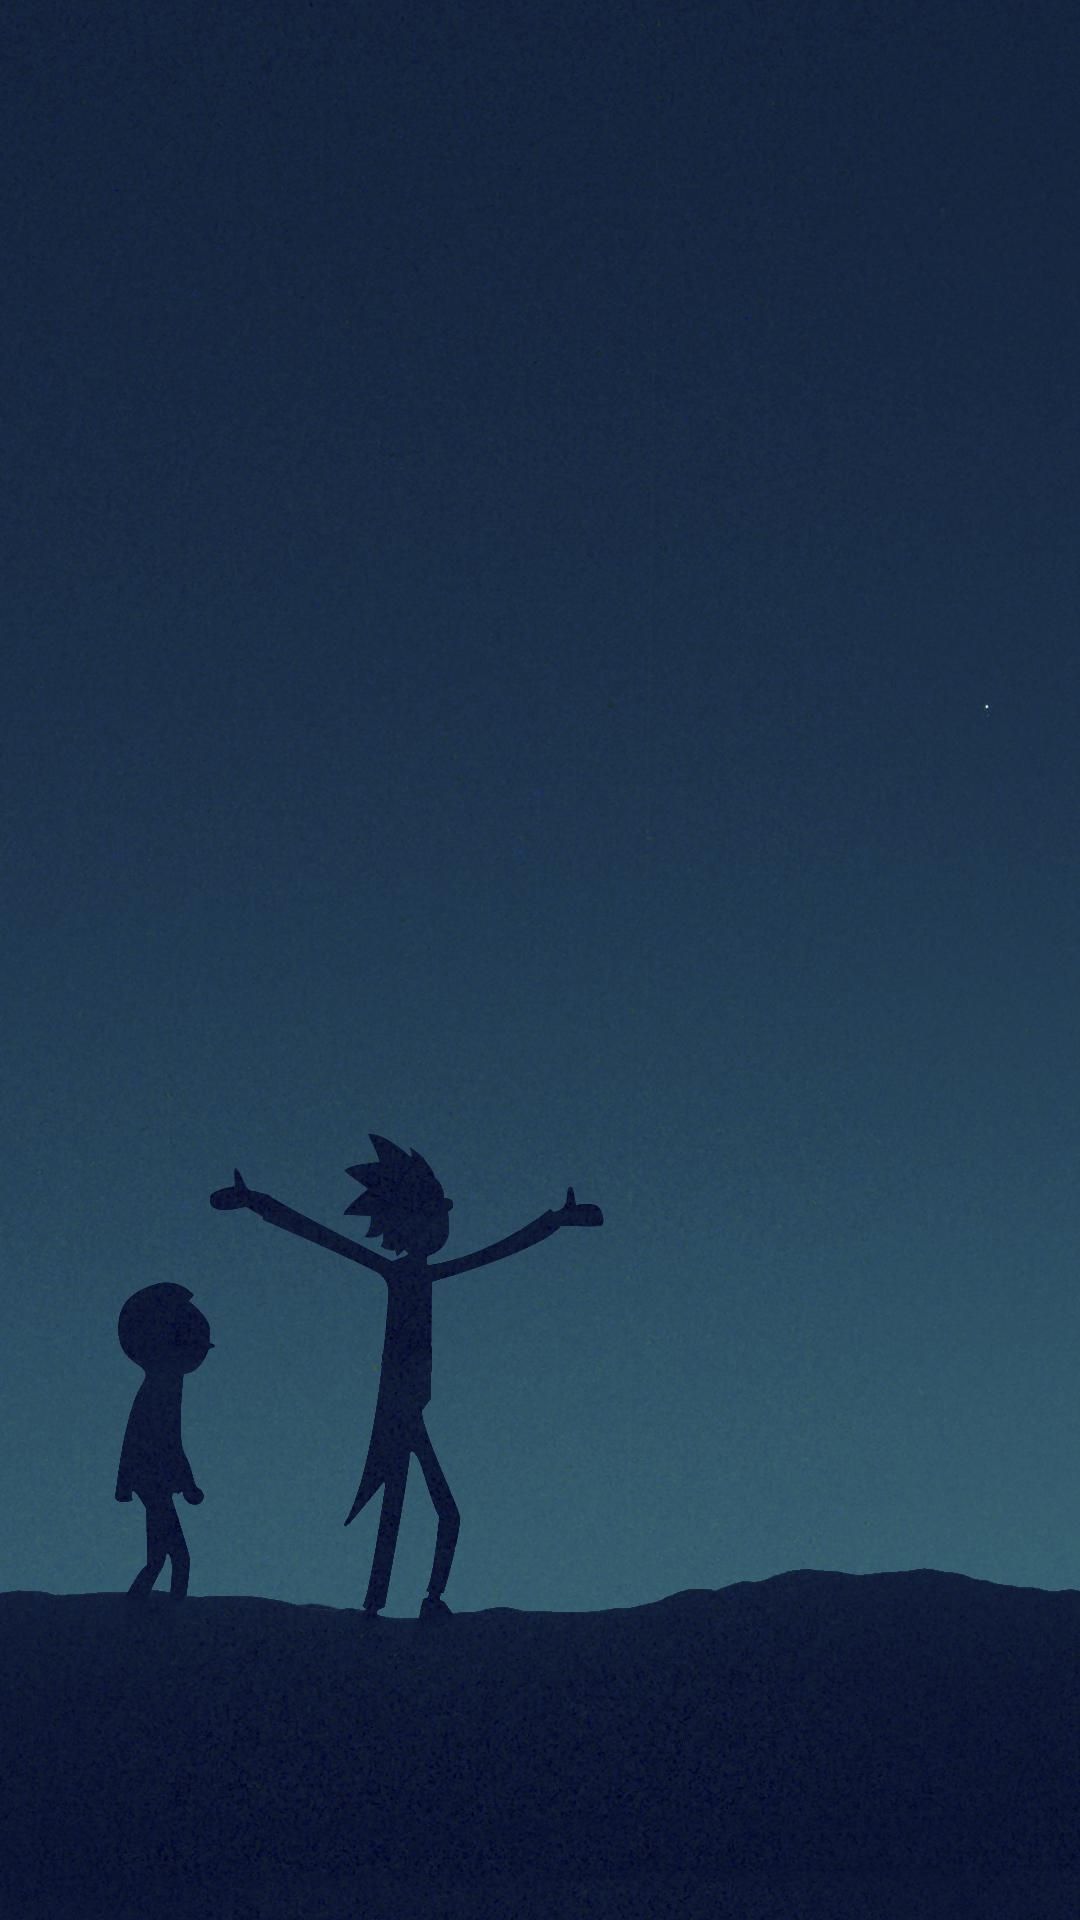 Rick and Morty iPhone Wallpapers on WallpaperDog